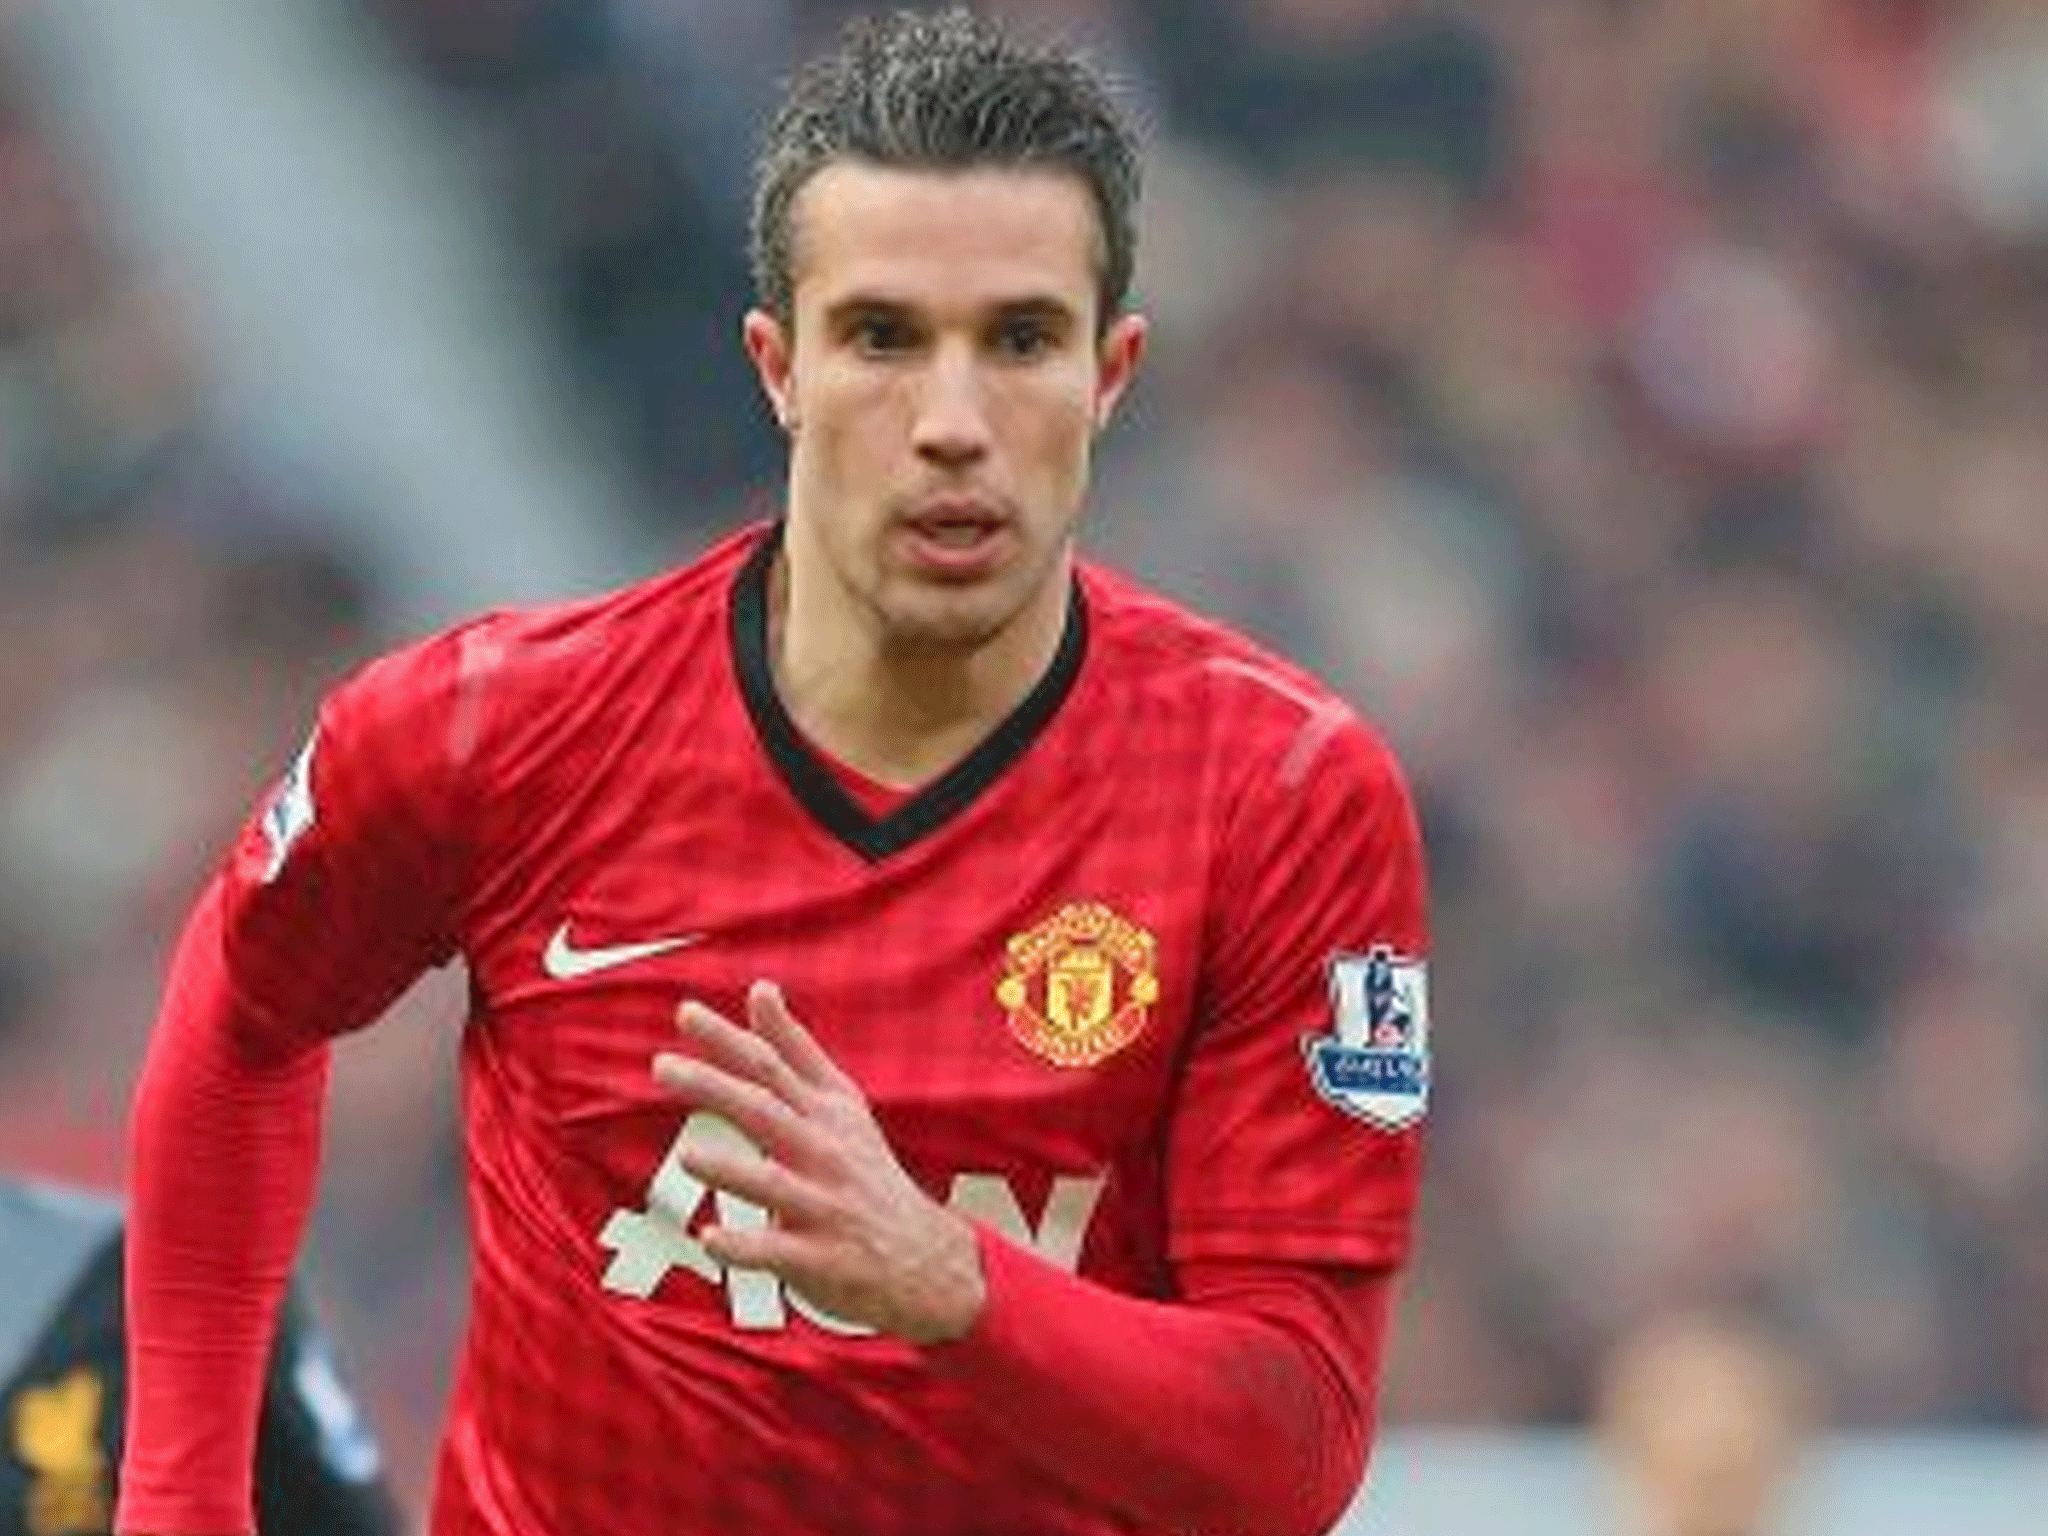 Robin Van Persie: The striker’s saleto Manchester United lifted
Arsenal’s profit to £17.8m